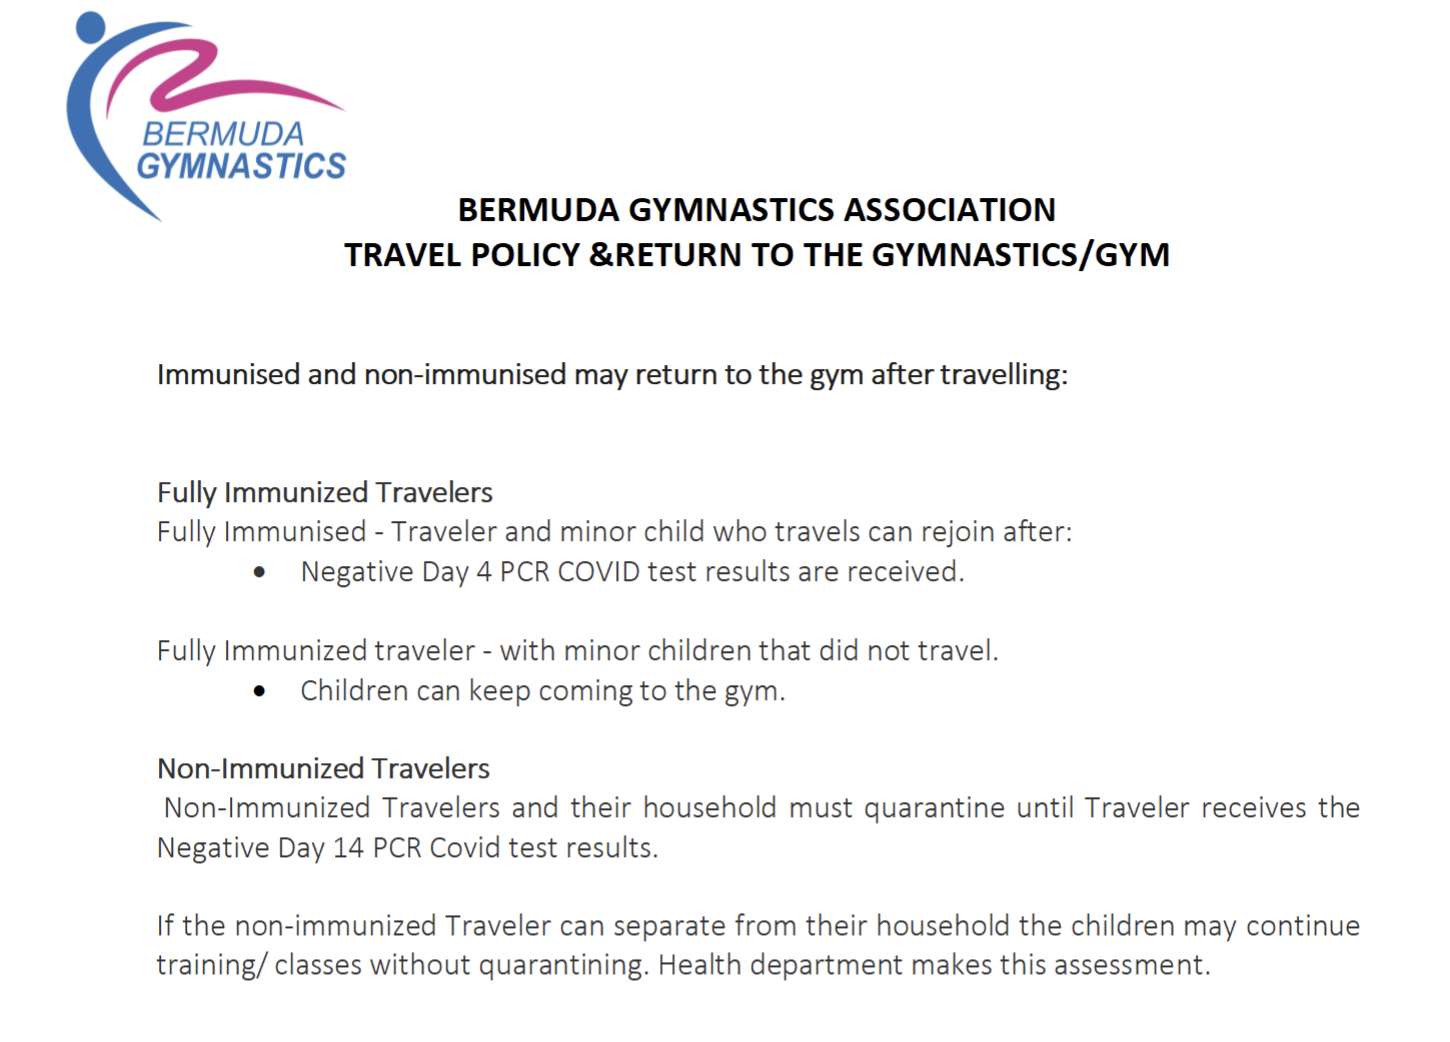 Travel policy updated